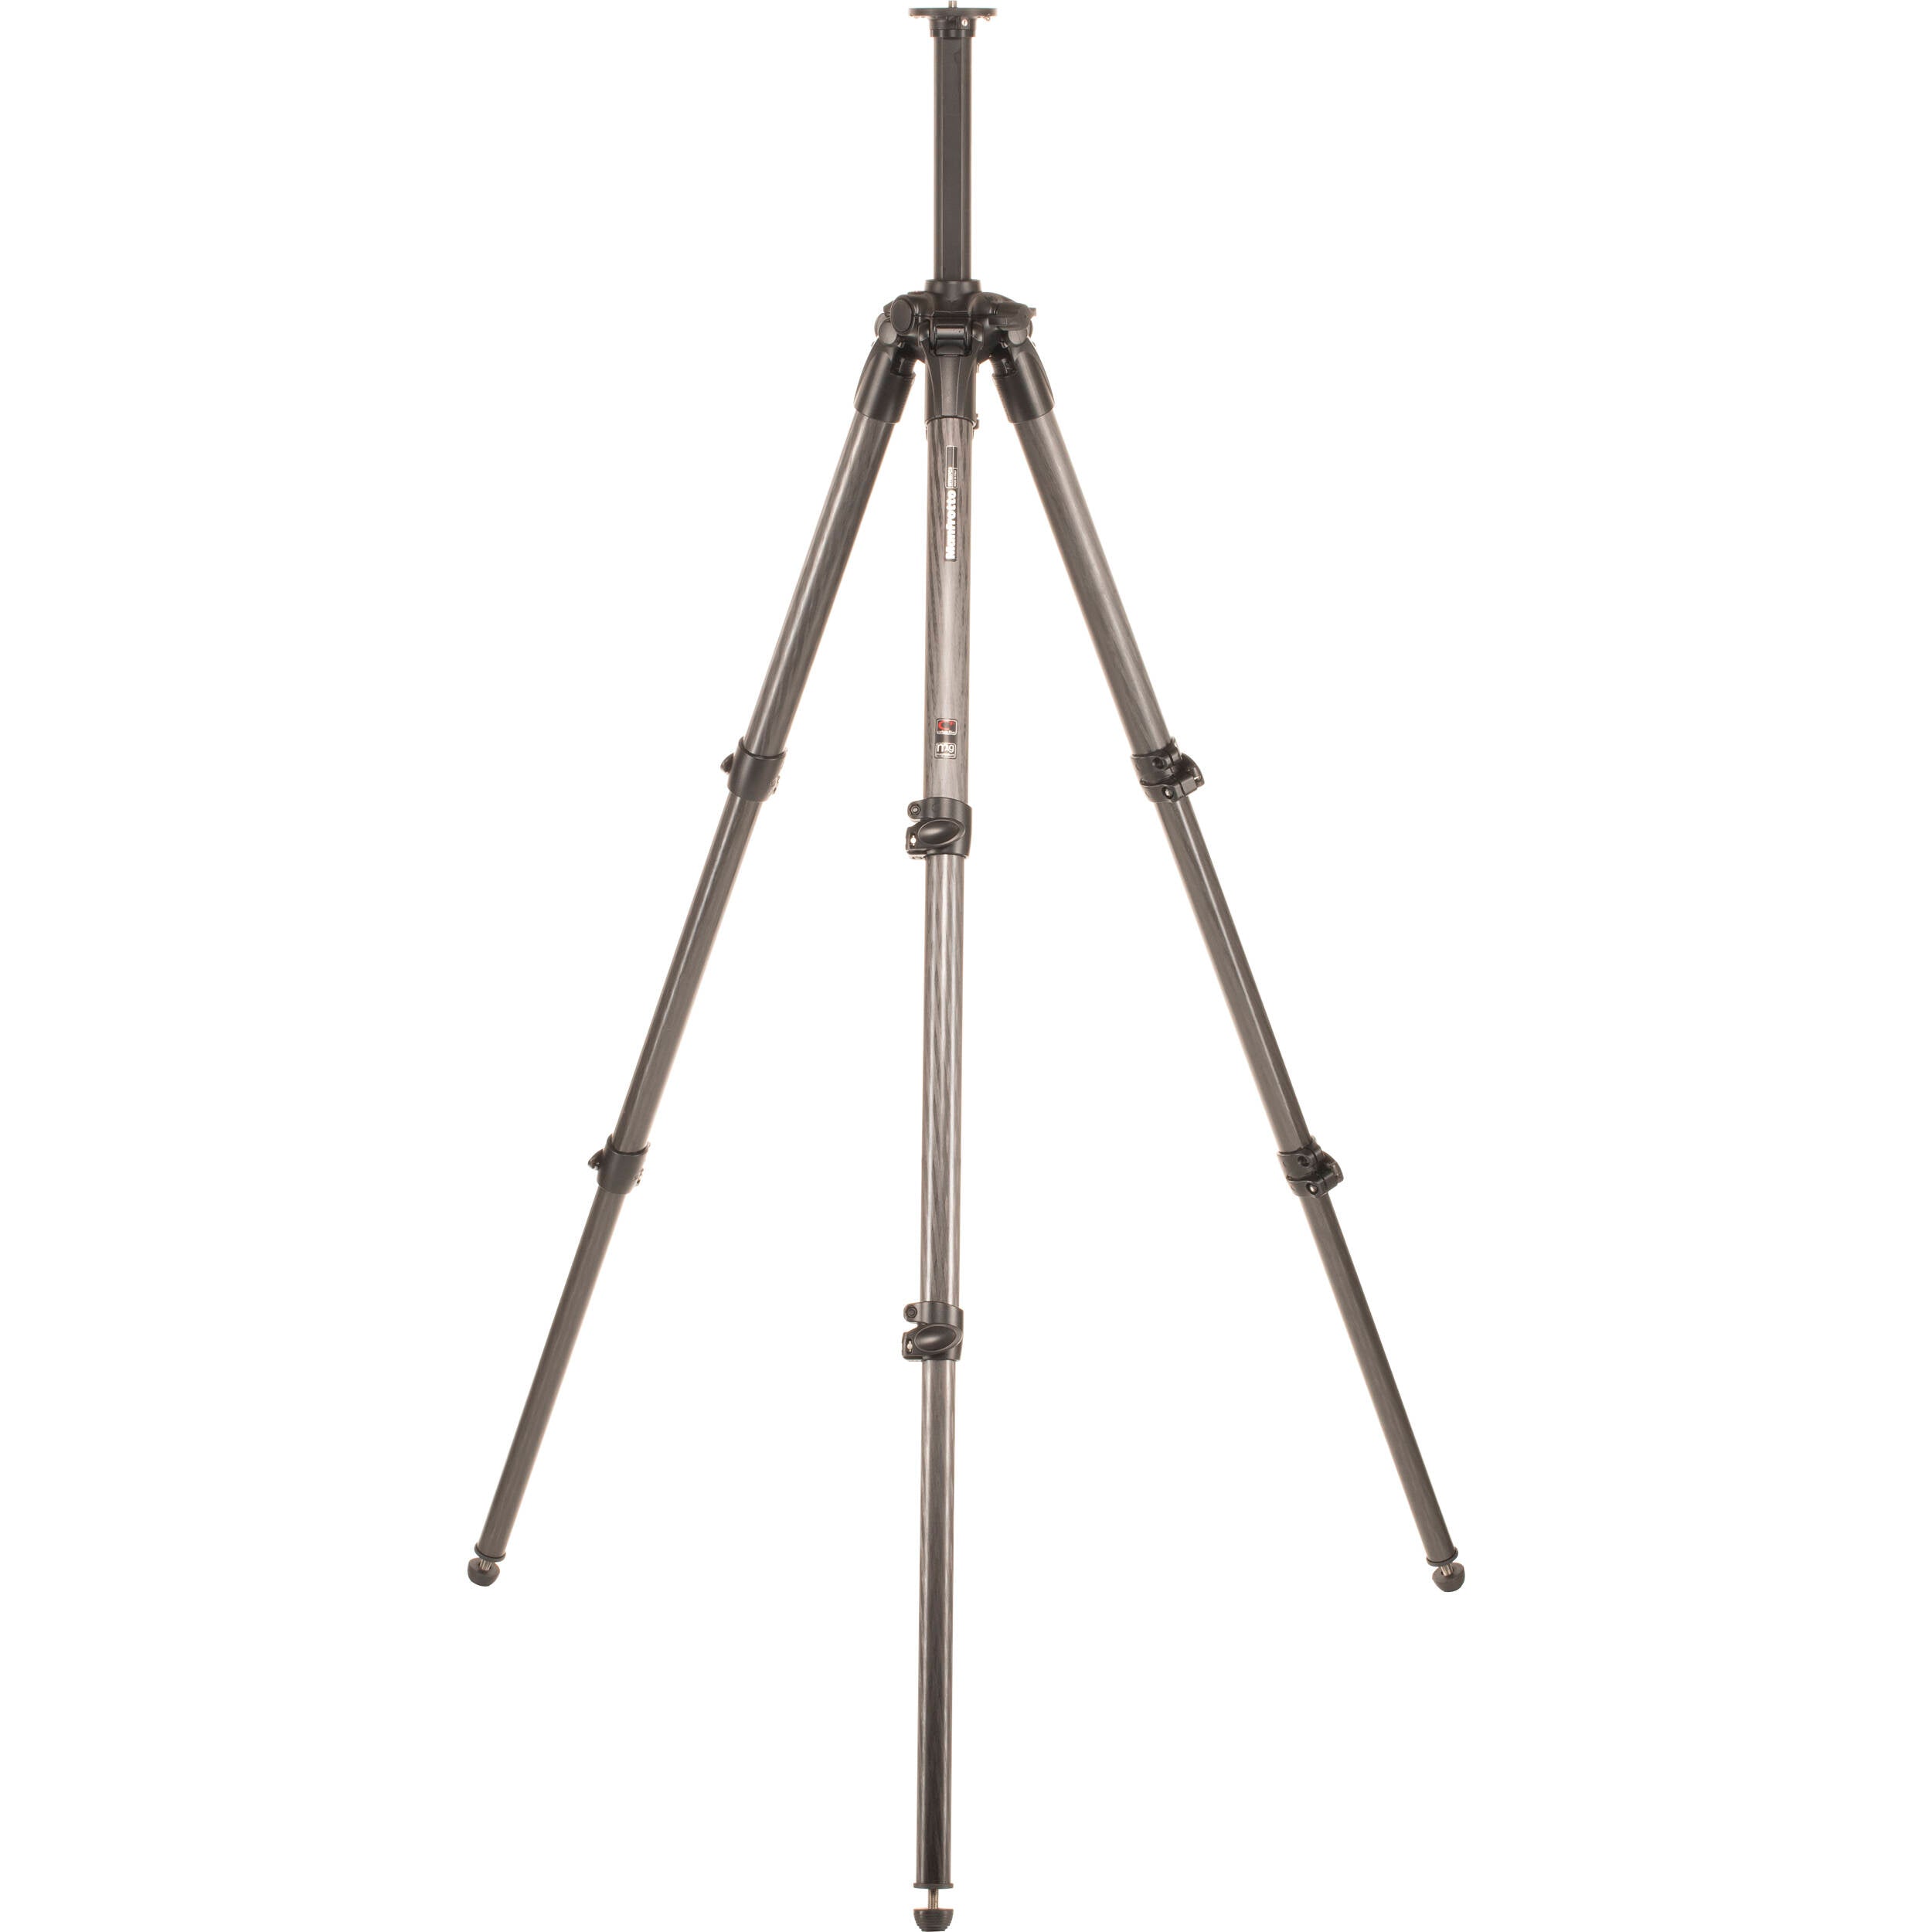 Manfrotto 057 Carbon Fiber Tripod with Rapid Column - 3-sections